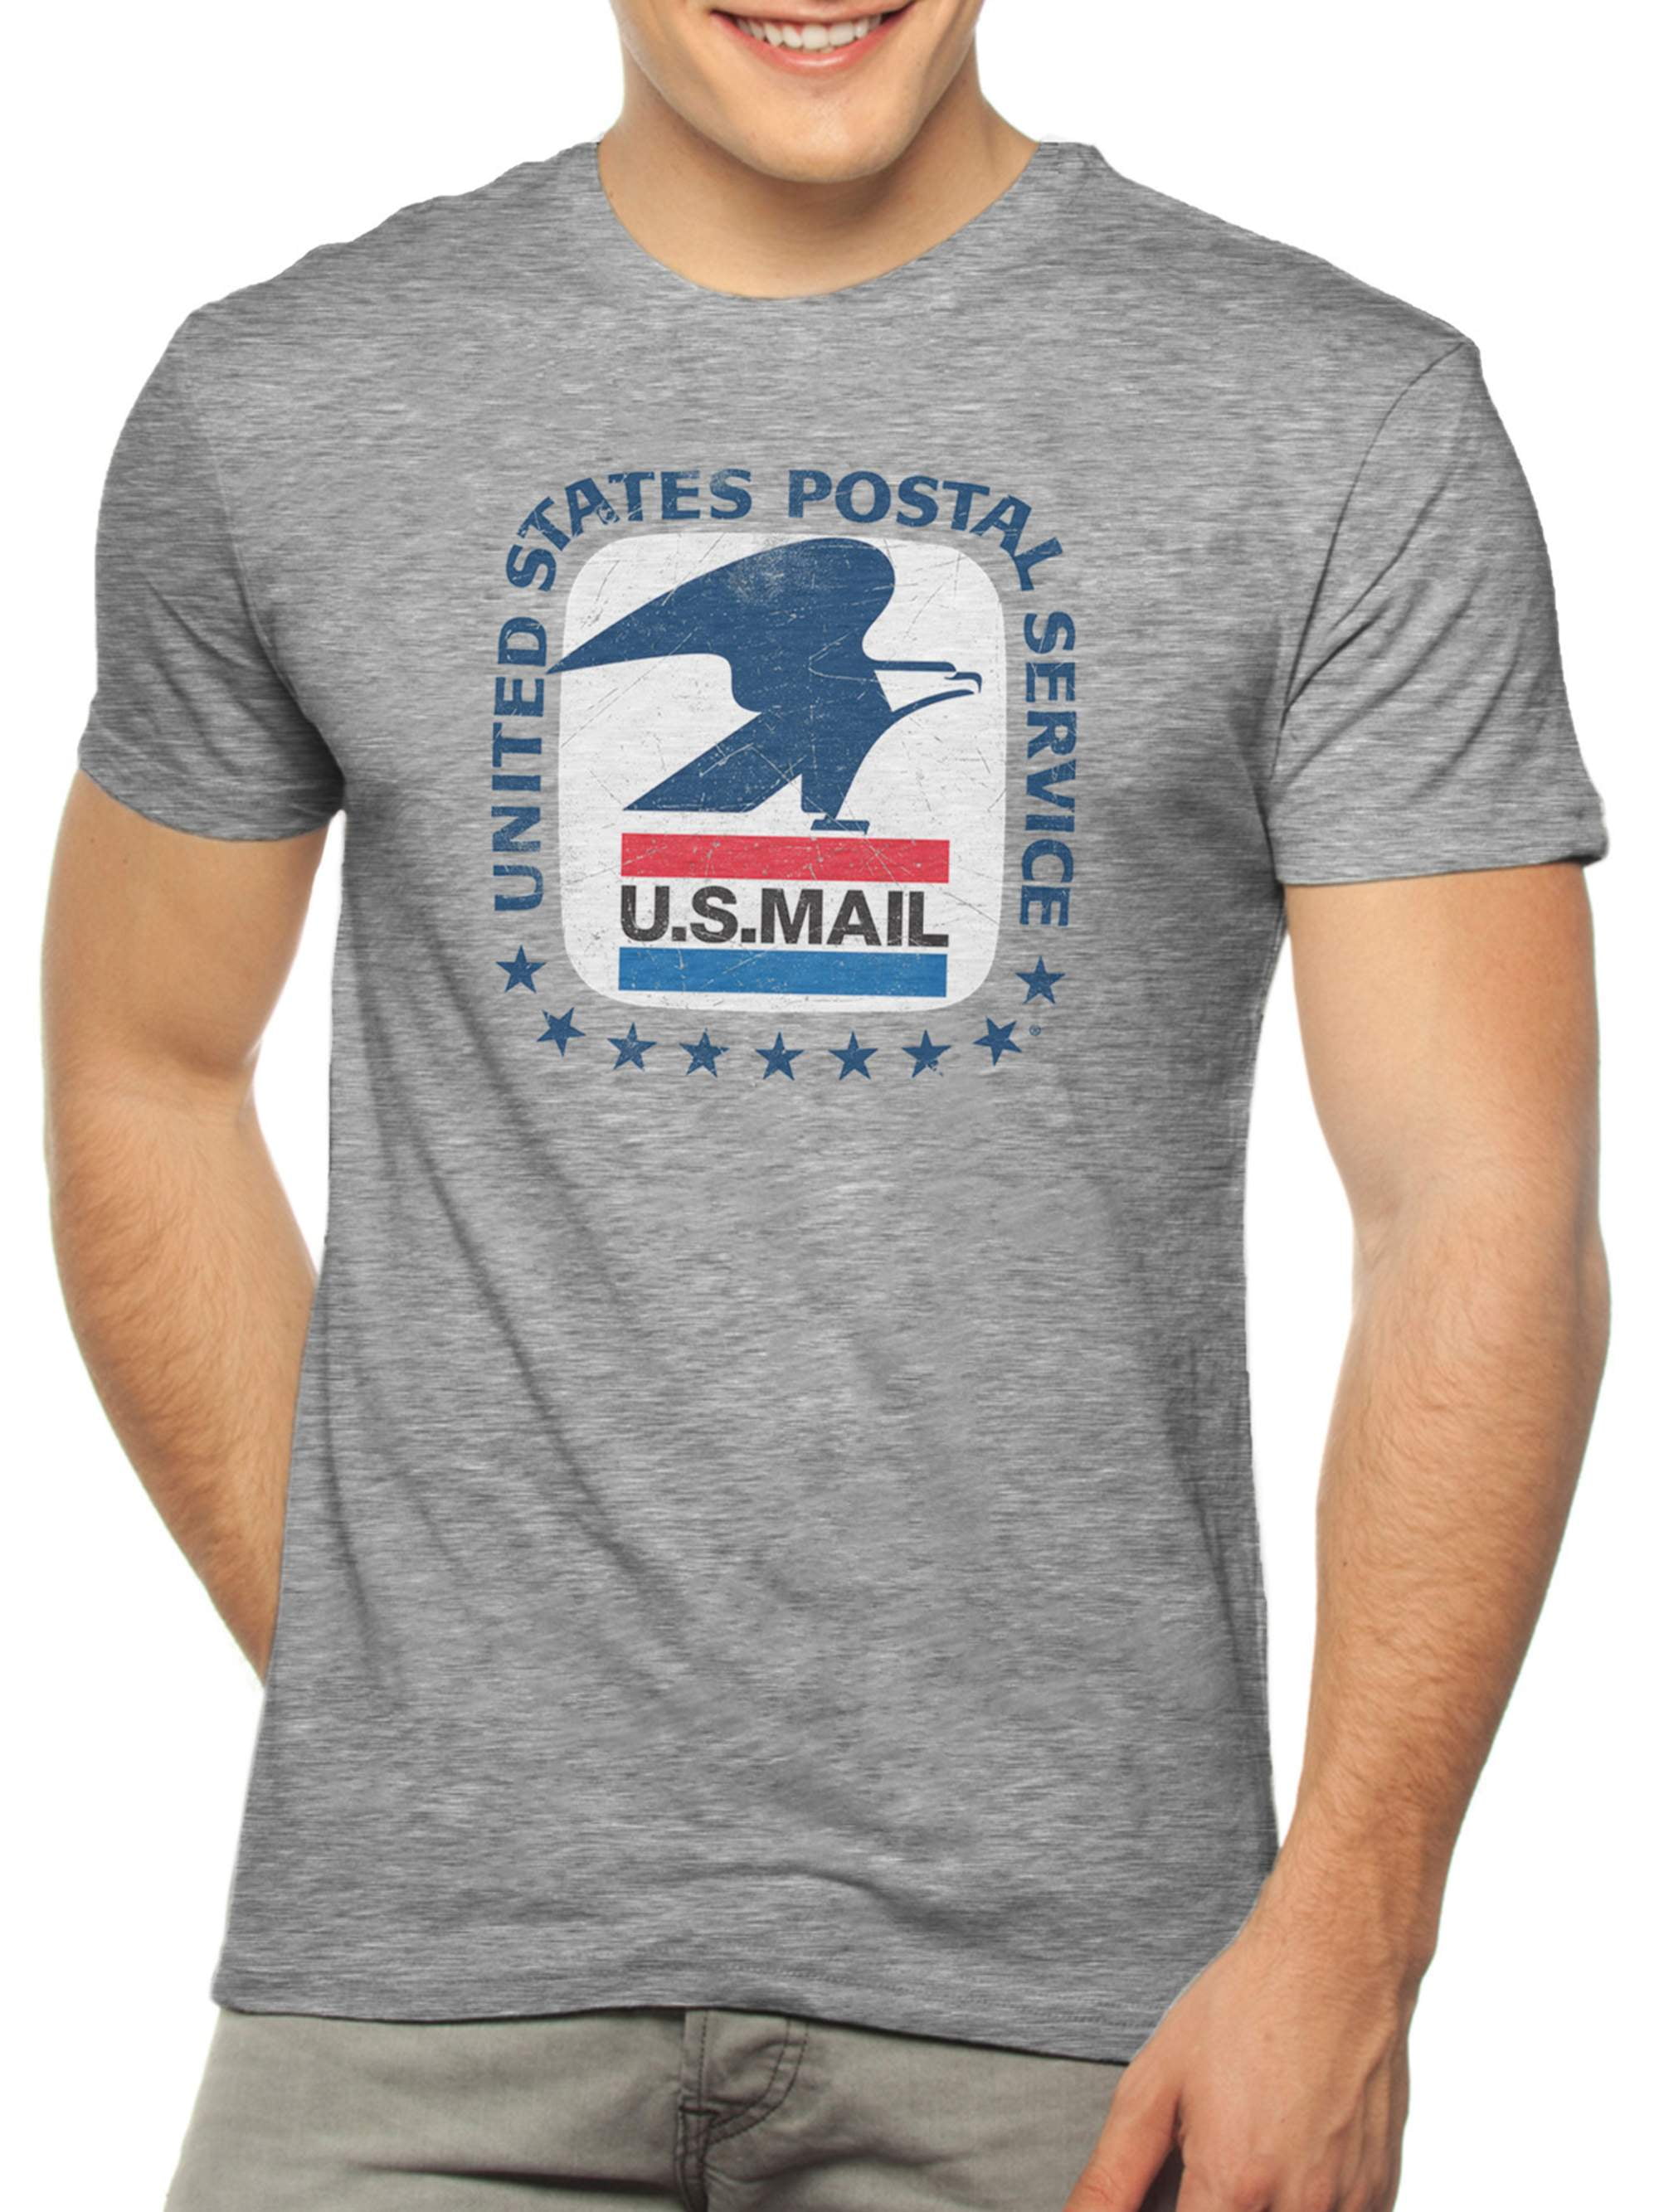 Buy > postal service t shirts > in stock